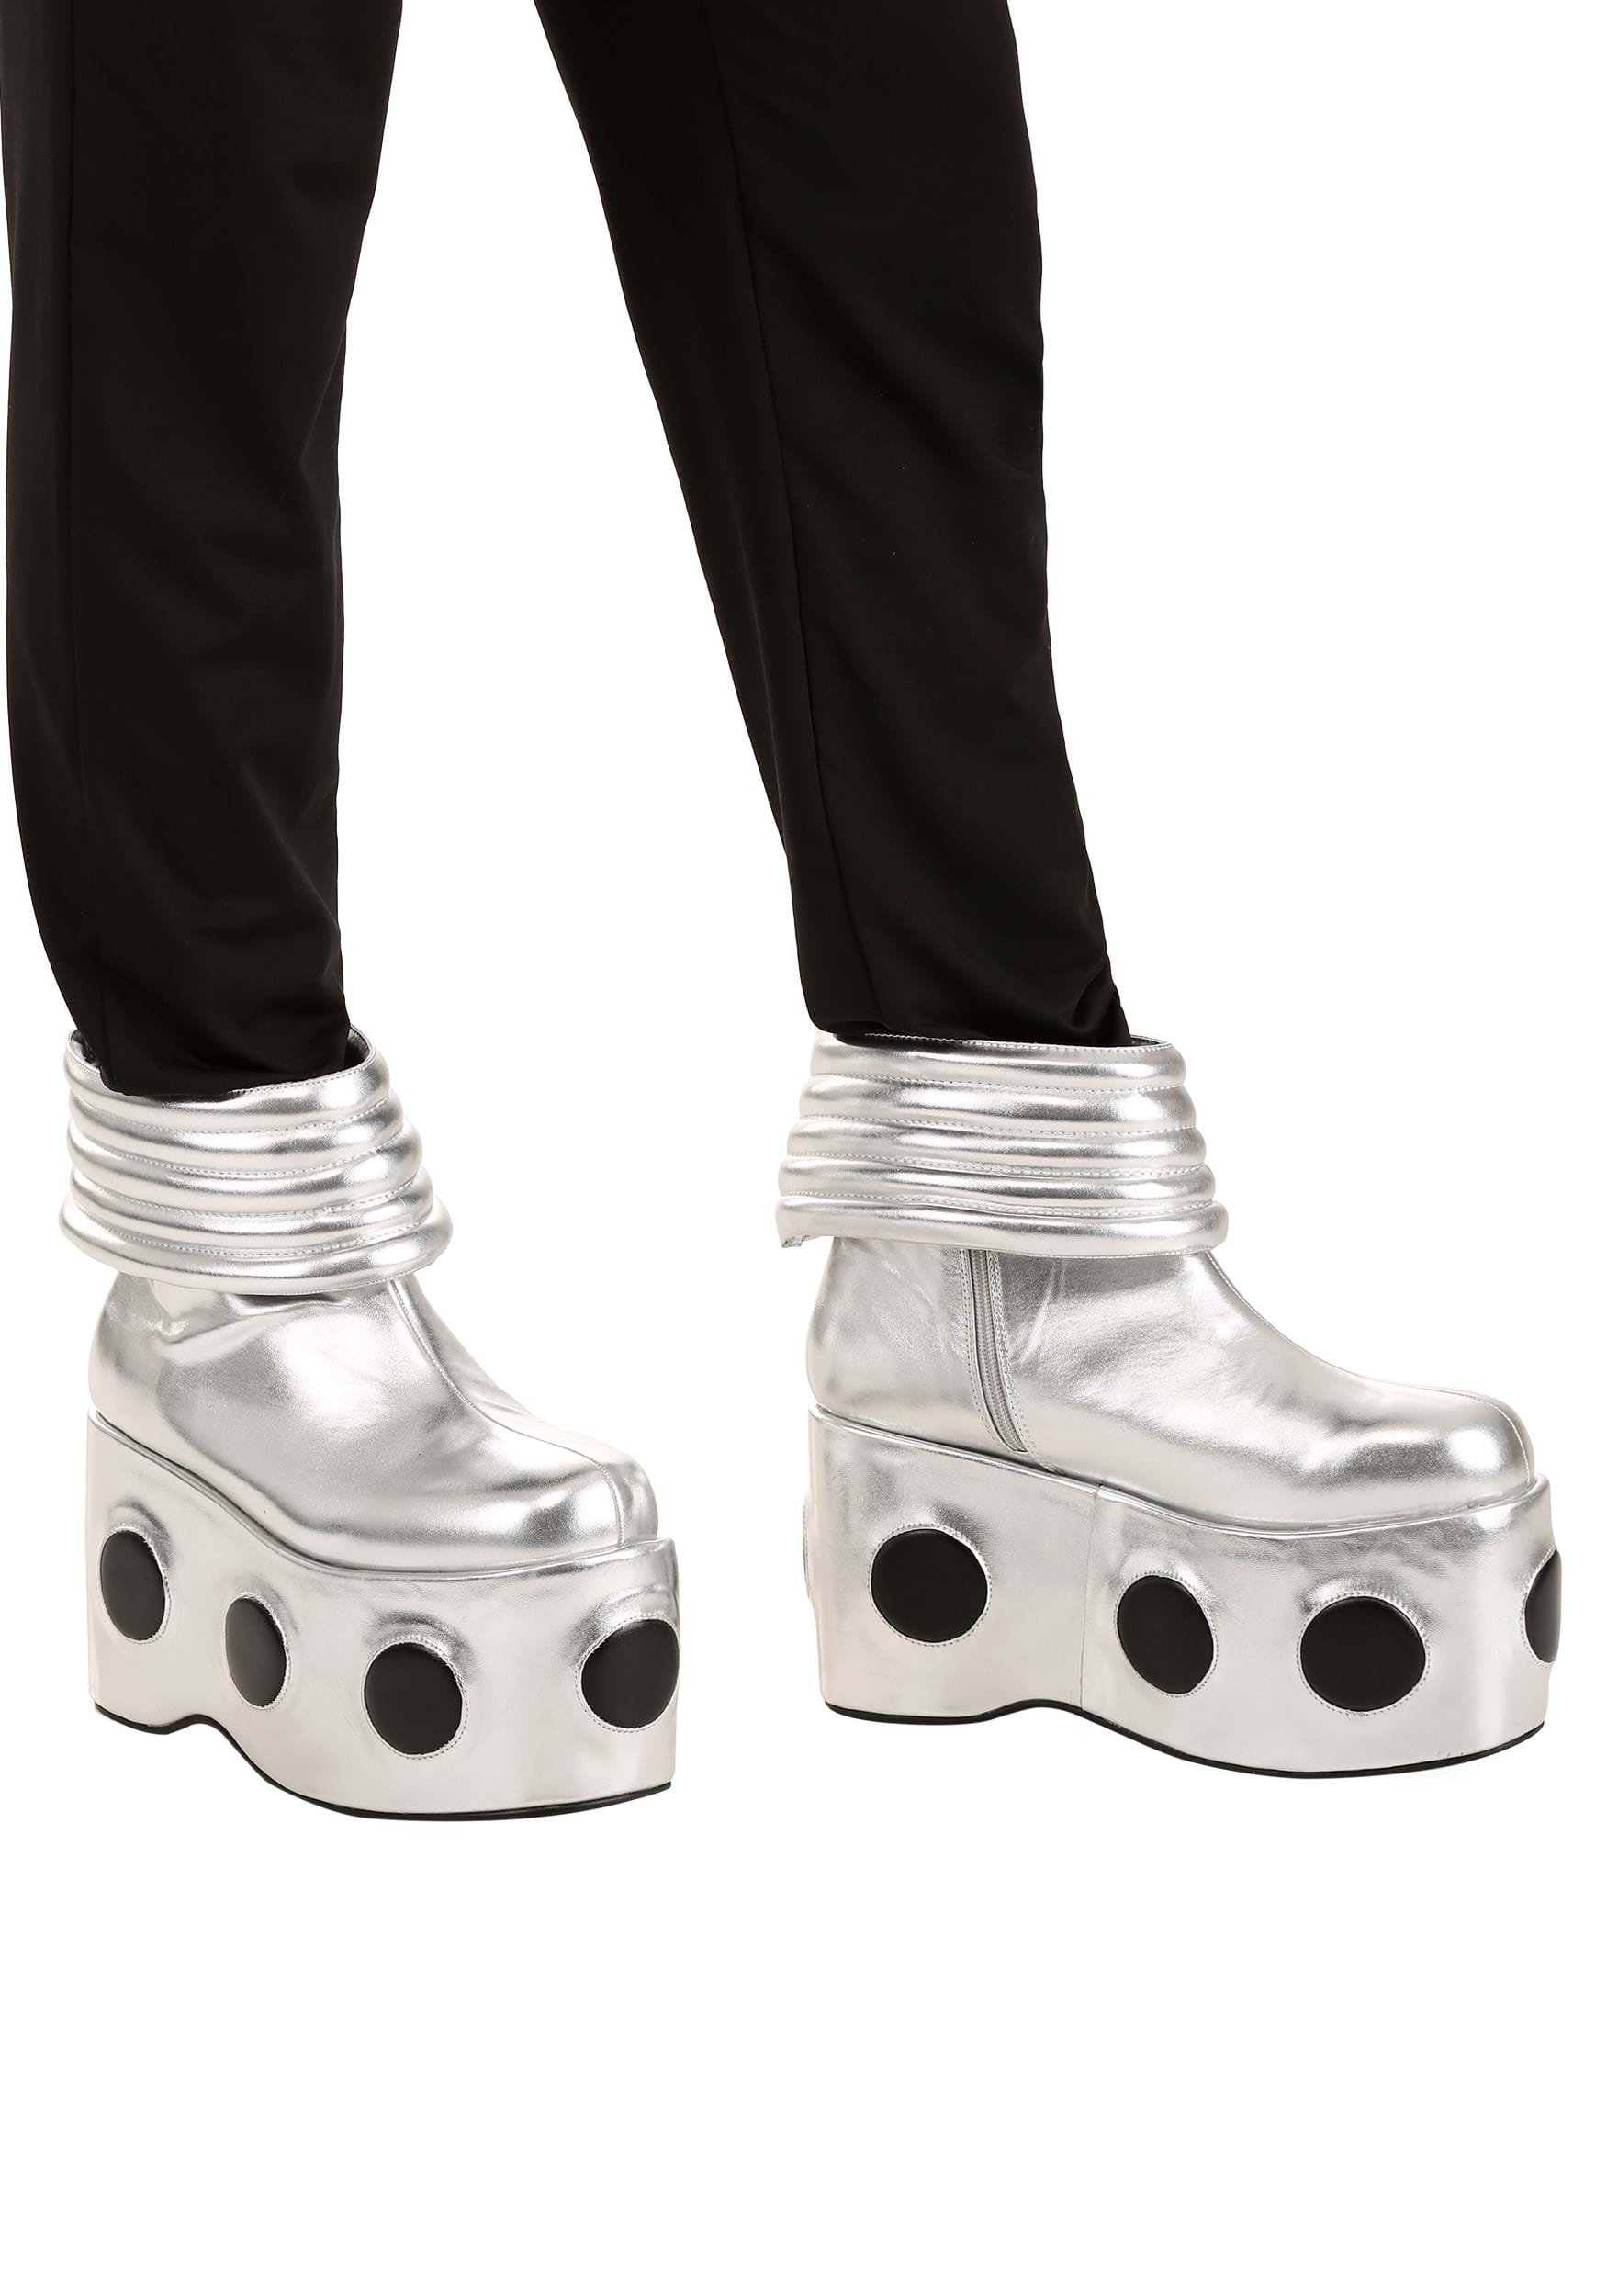 KISS Spaceman Boots , Exclusive Fancy Dress Costume Boots